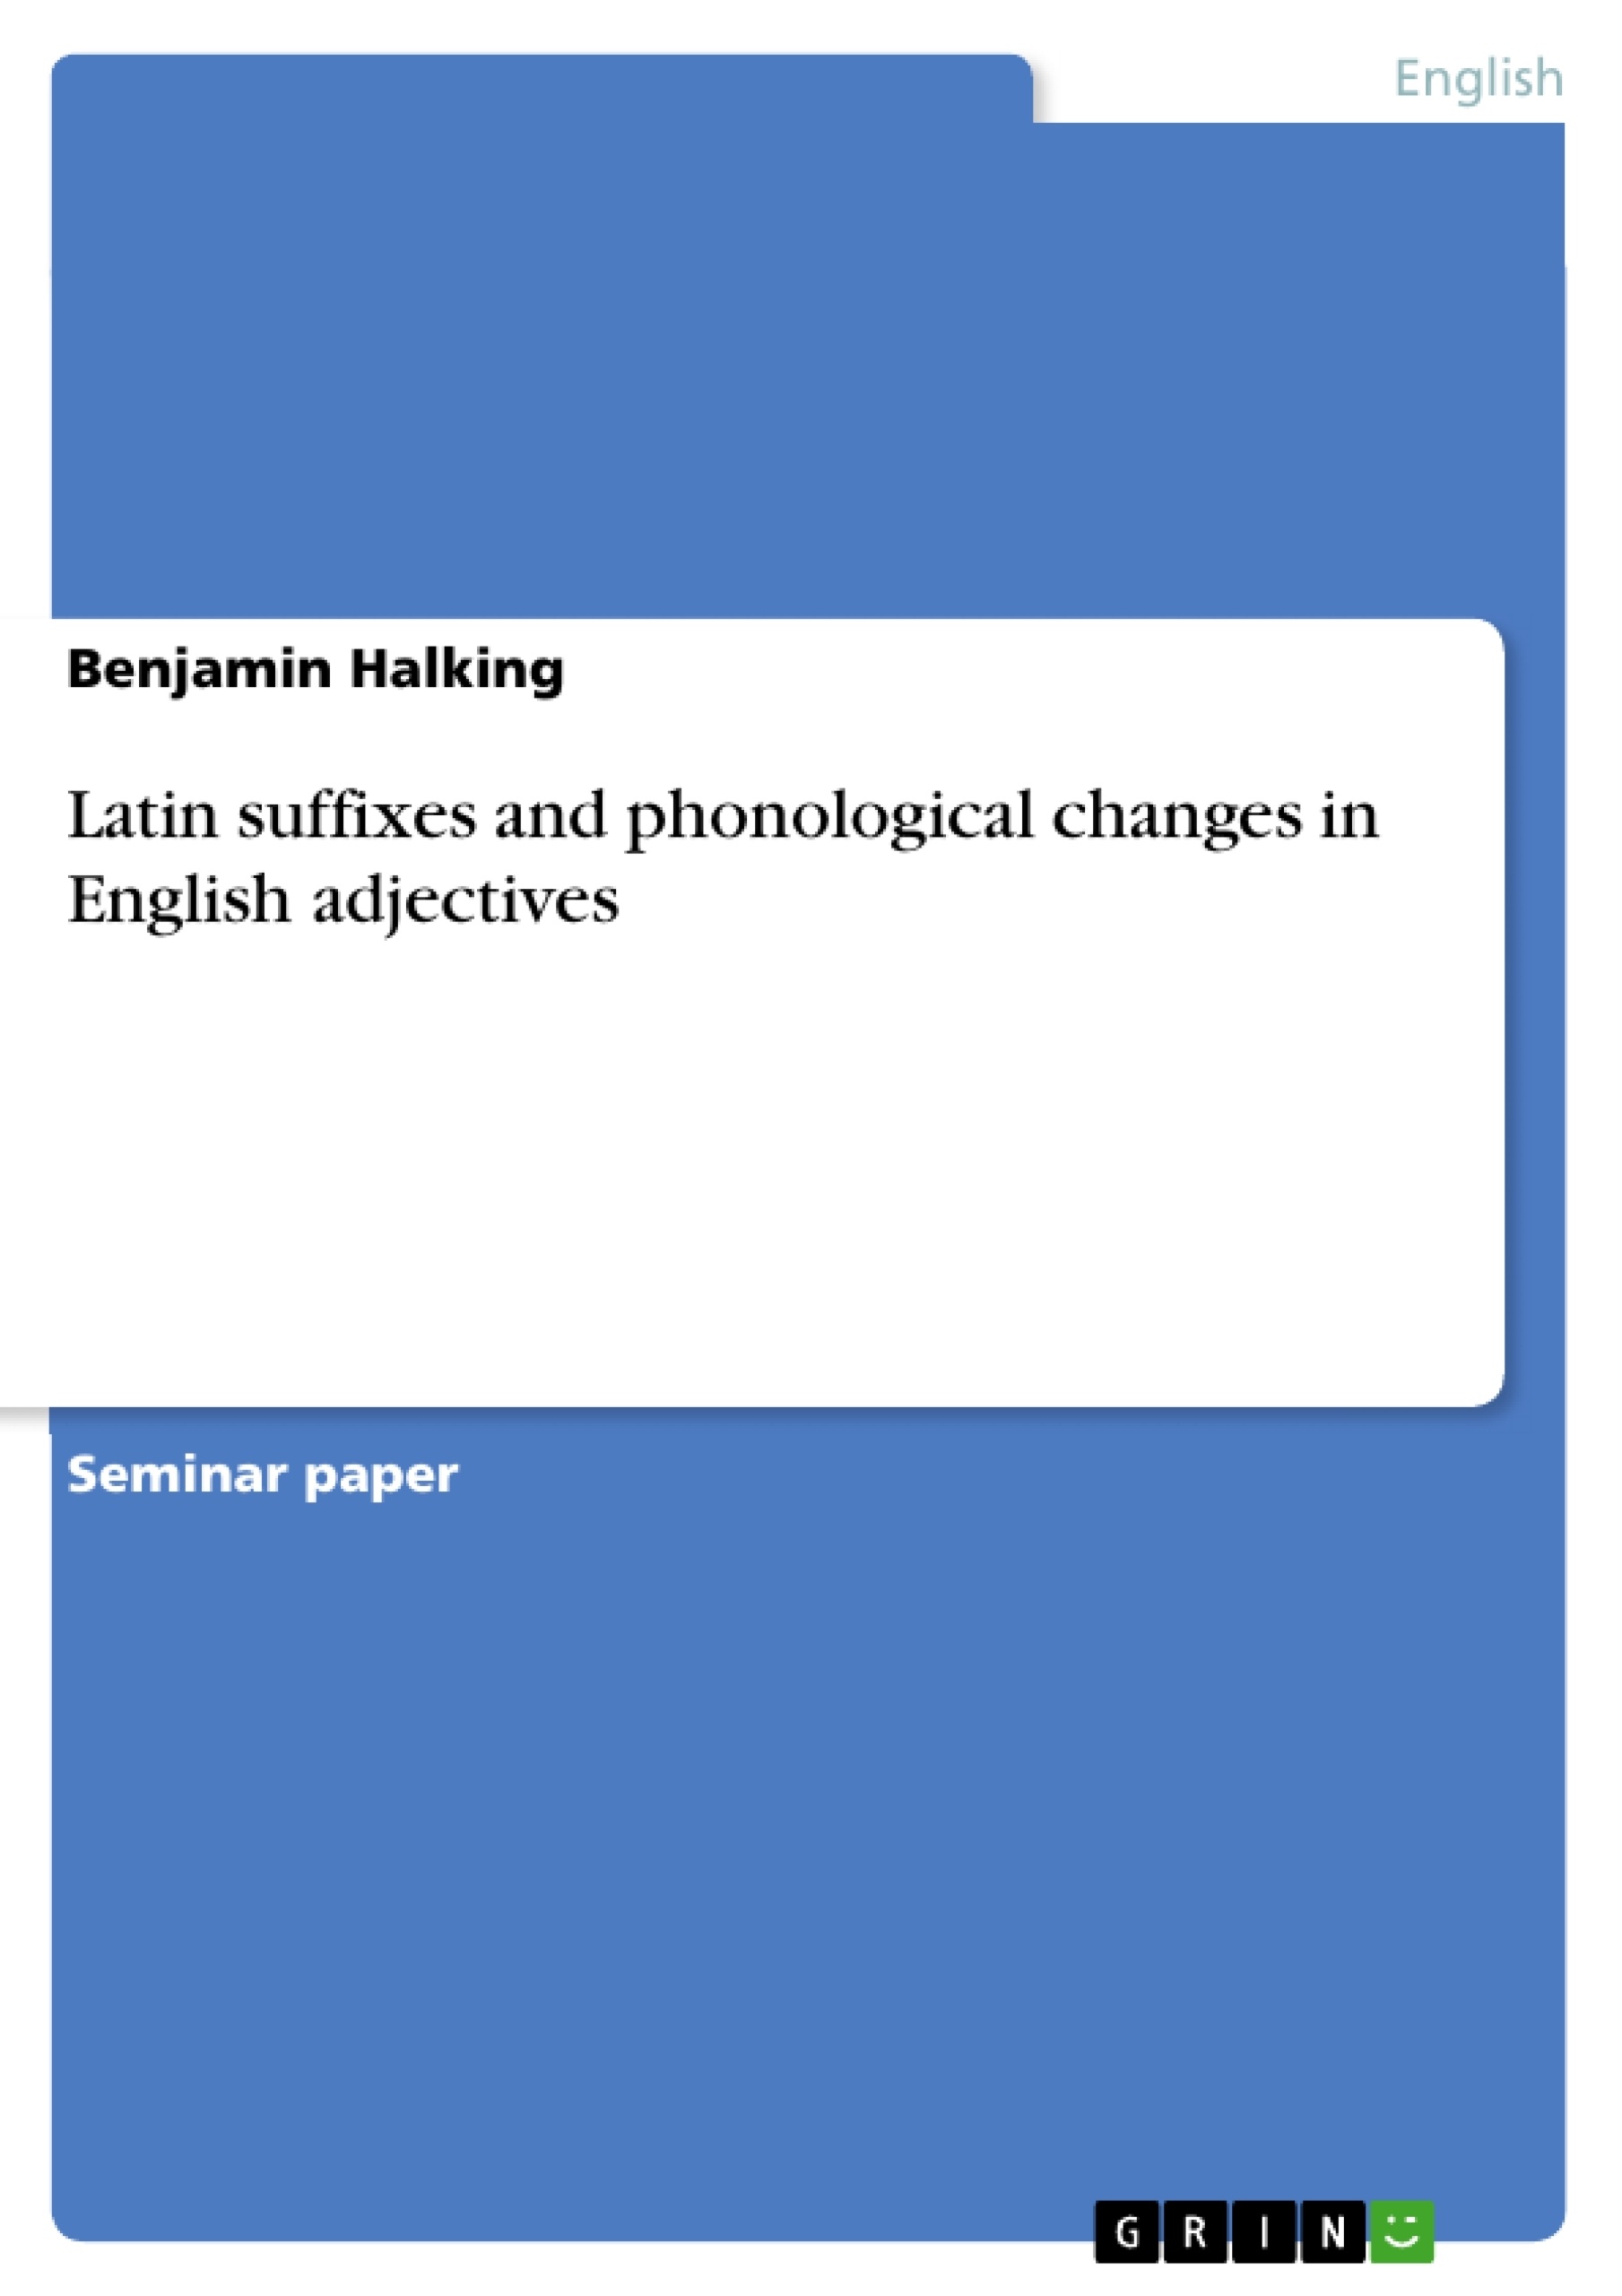 Title: Latin suffixes and phonological changes in English adjectives